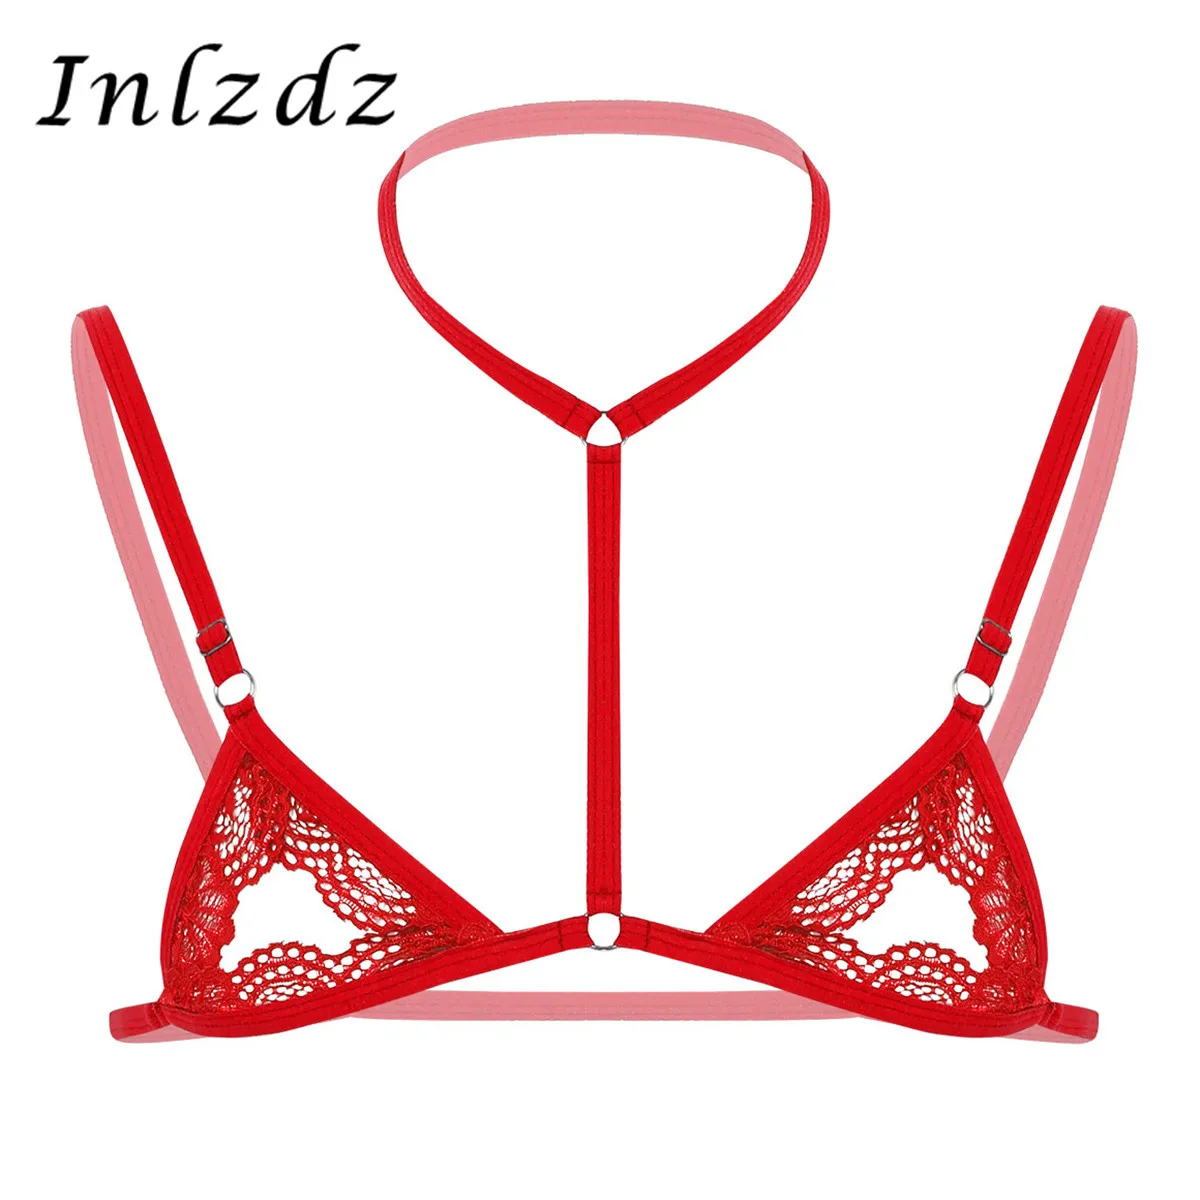 

Mens Erotic Lingerie Sissy Bra Top for Sex Sheer Lace Halter Neck Adjustable Spaghetti Straps Wire-free Unlined Mini Bra Tops